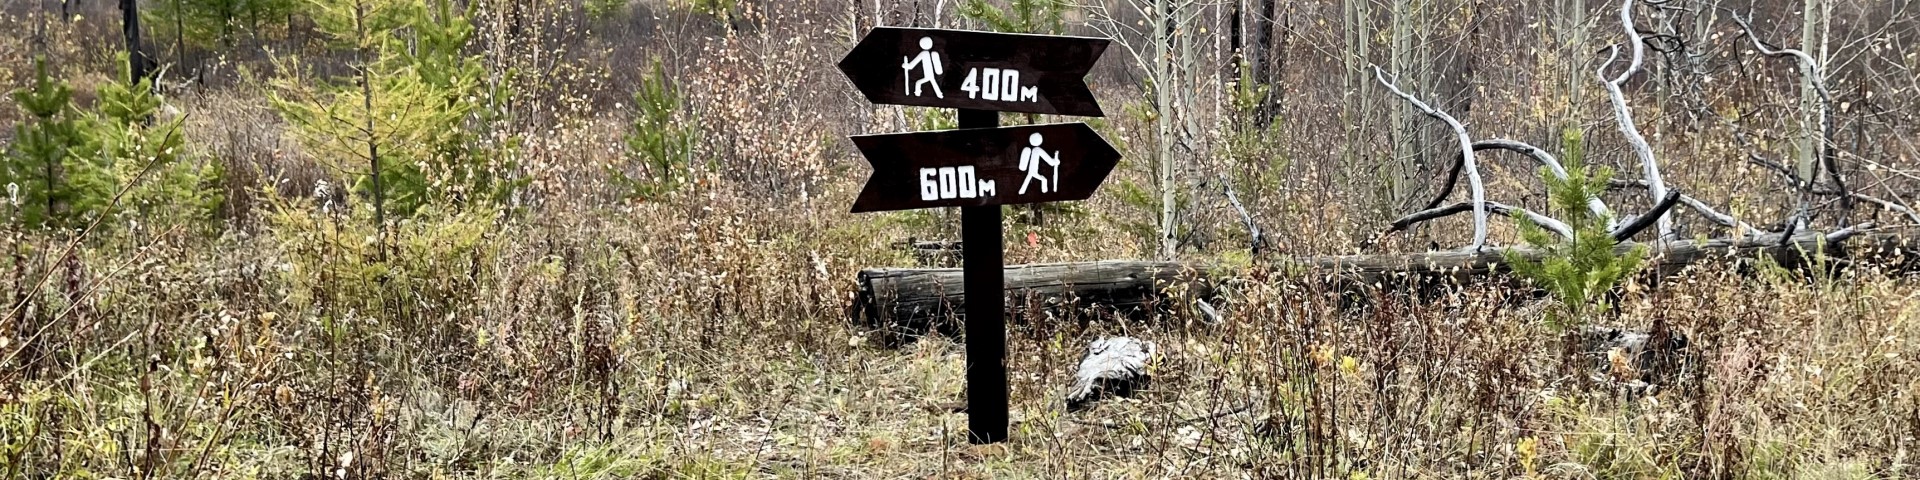 A signpost provides information about two hiking routes to the left and right. Together with the protected area administration, hiking routes are being developed in the Khan Khentii protected area to promote environmental education for visitors.